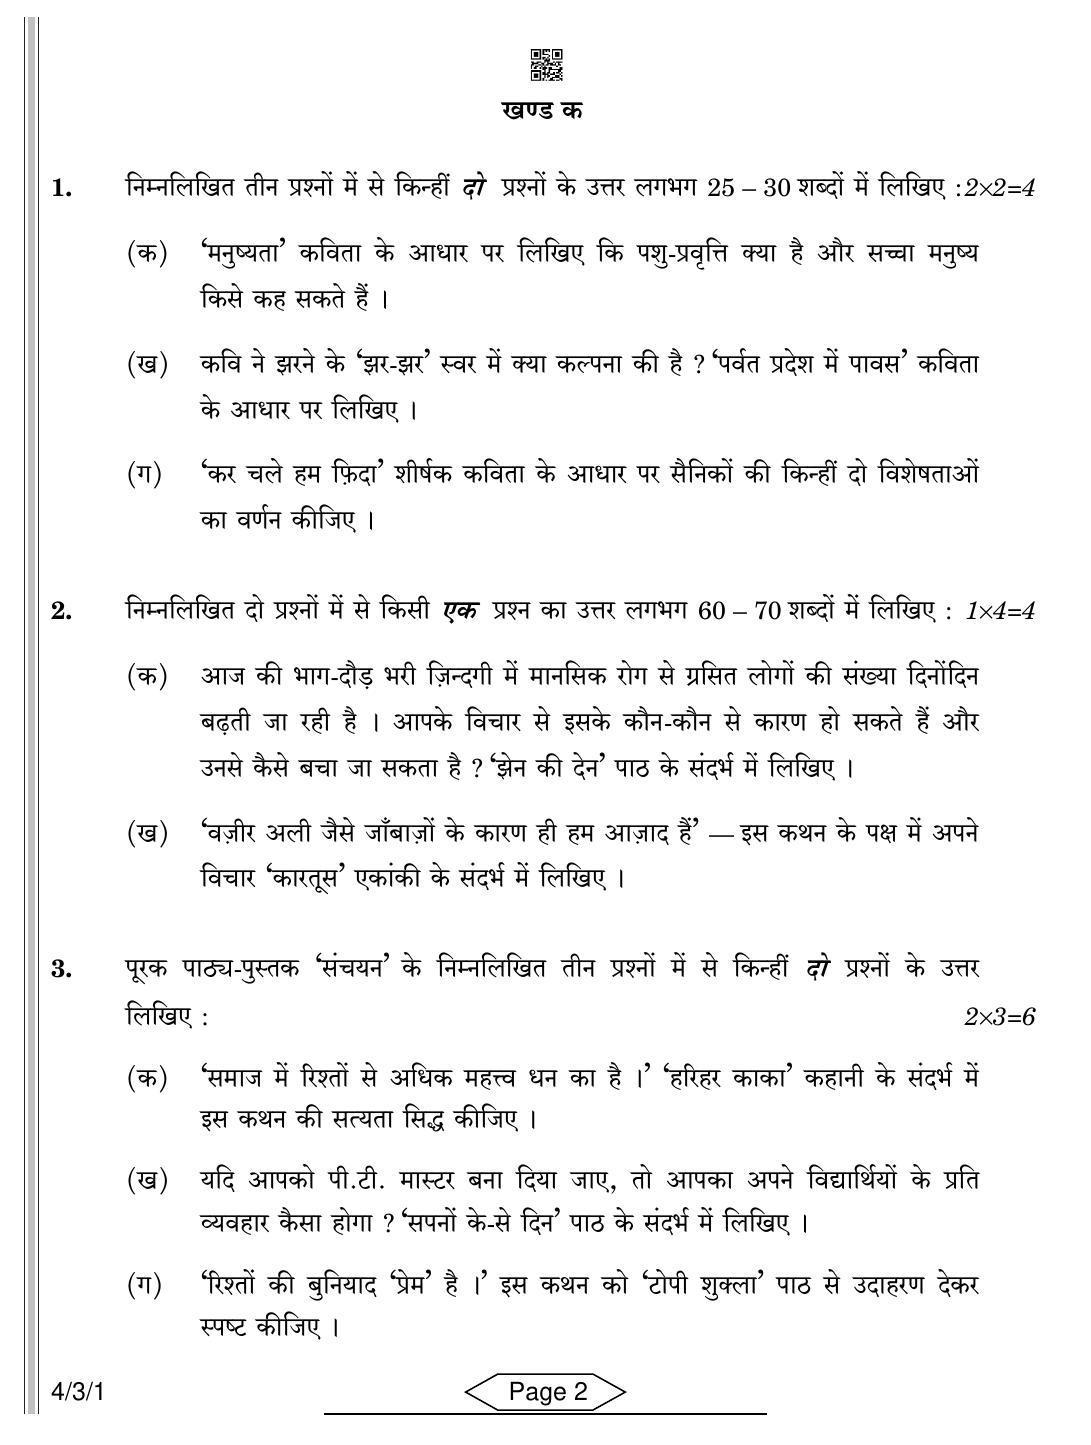 CBSE Class 10 4-3-1 Hindi B 2022 Question Paper - Page 2